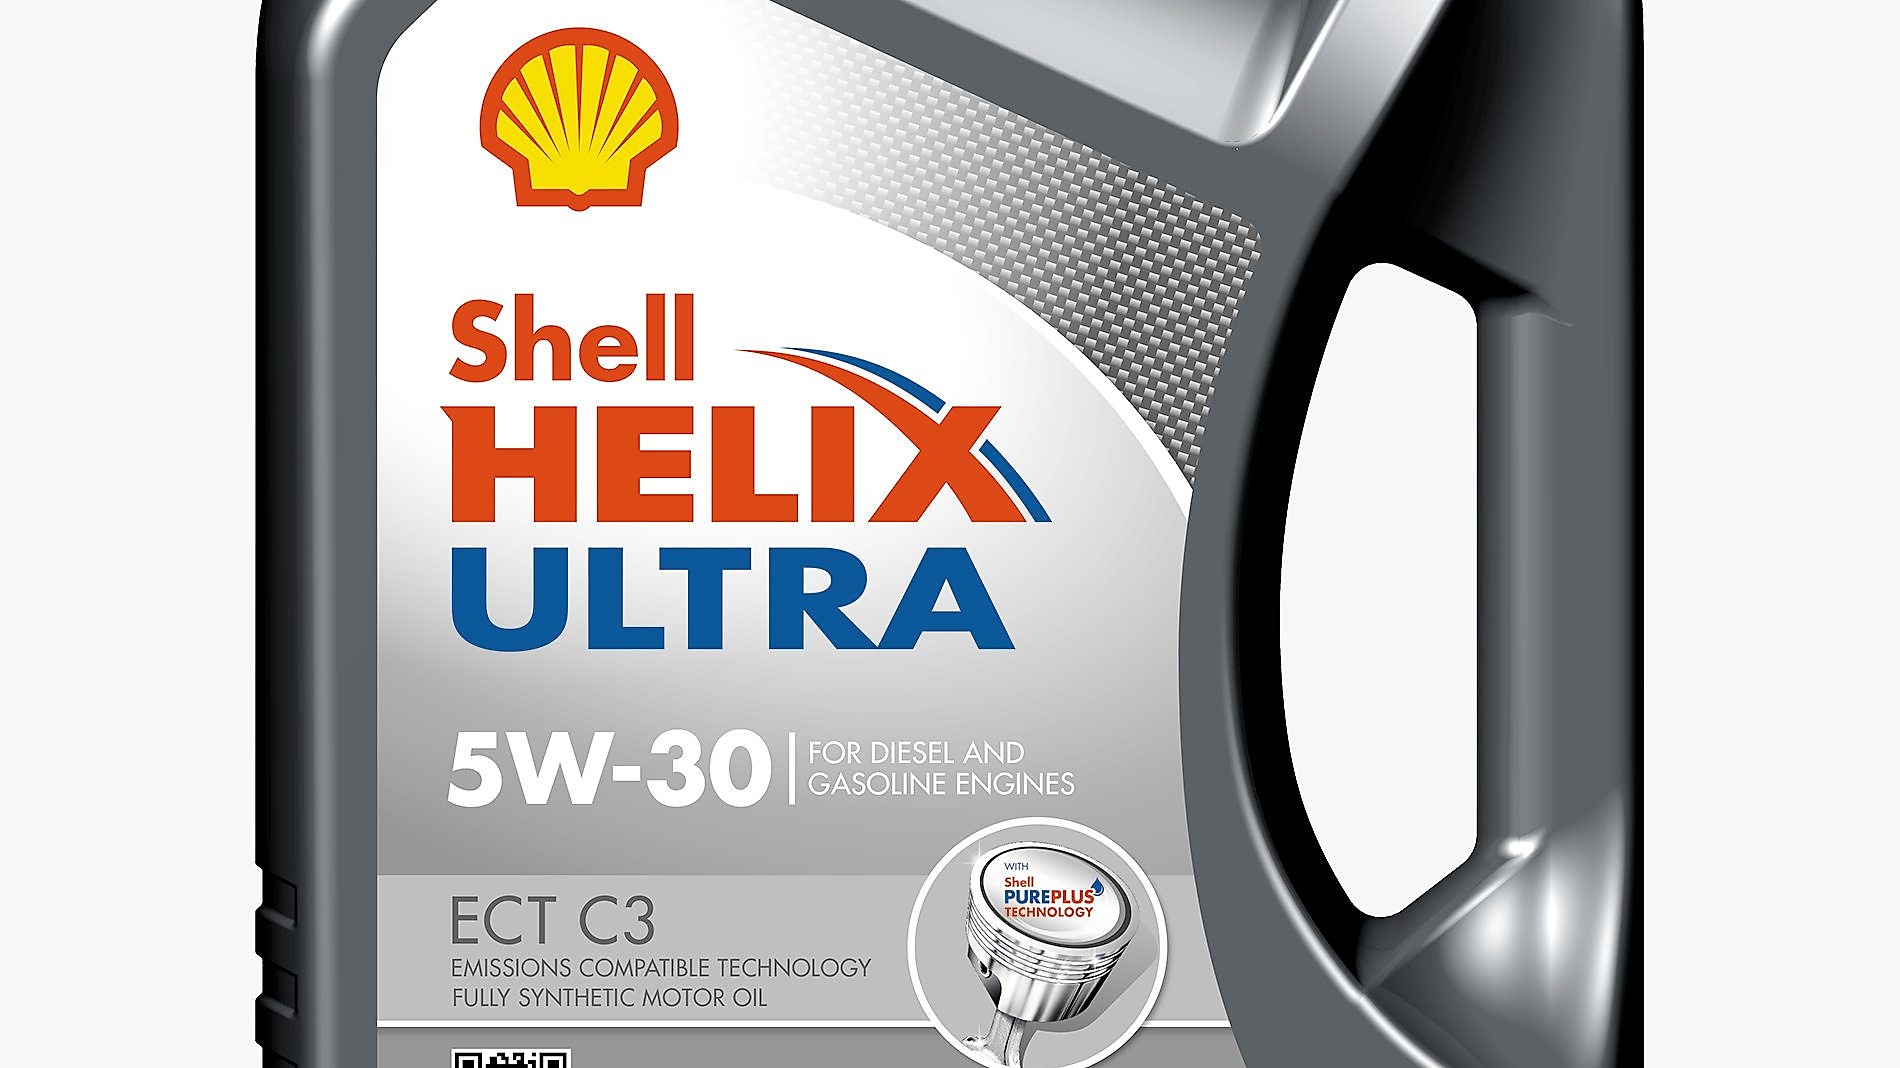 Aceite motor SHELL HELIX HX8 ECT C3 5W30 Diésel y gasolina 5L - Norauto